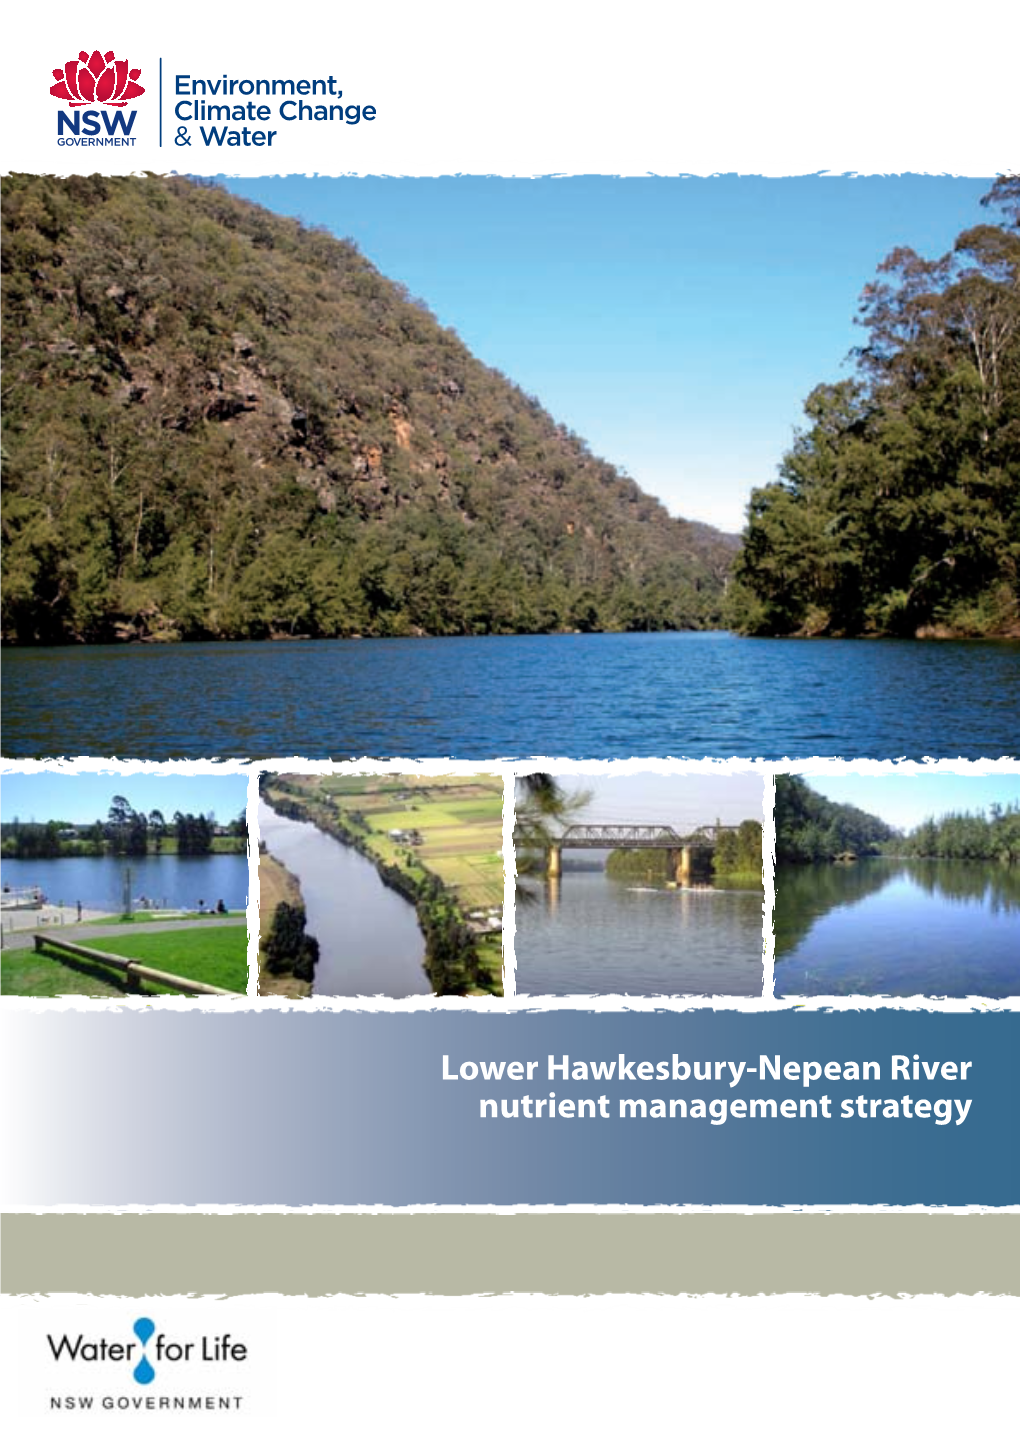 Lower Hawkesbury-Nepean River Nutrient Management Strategy DECCW